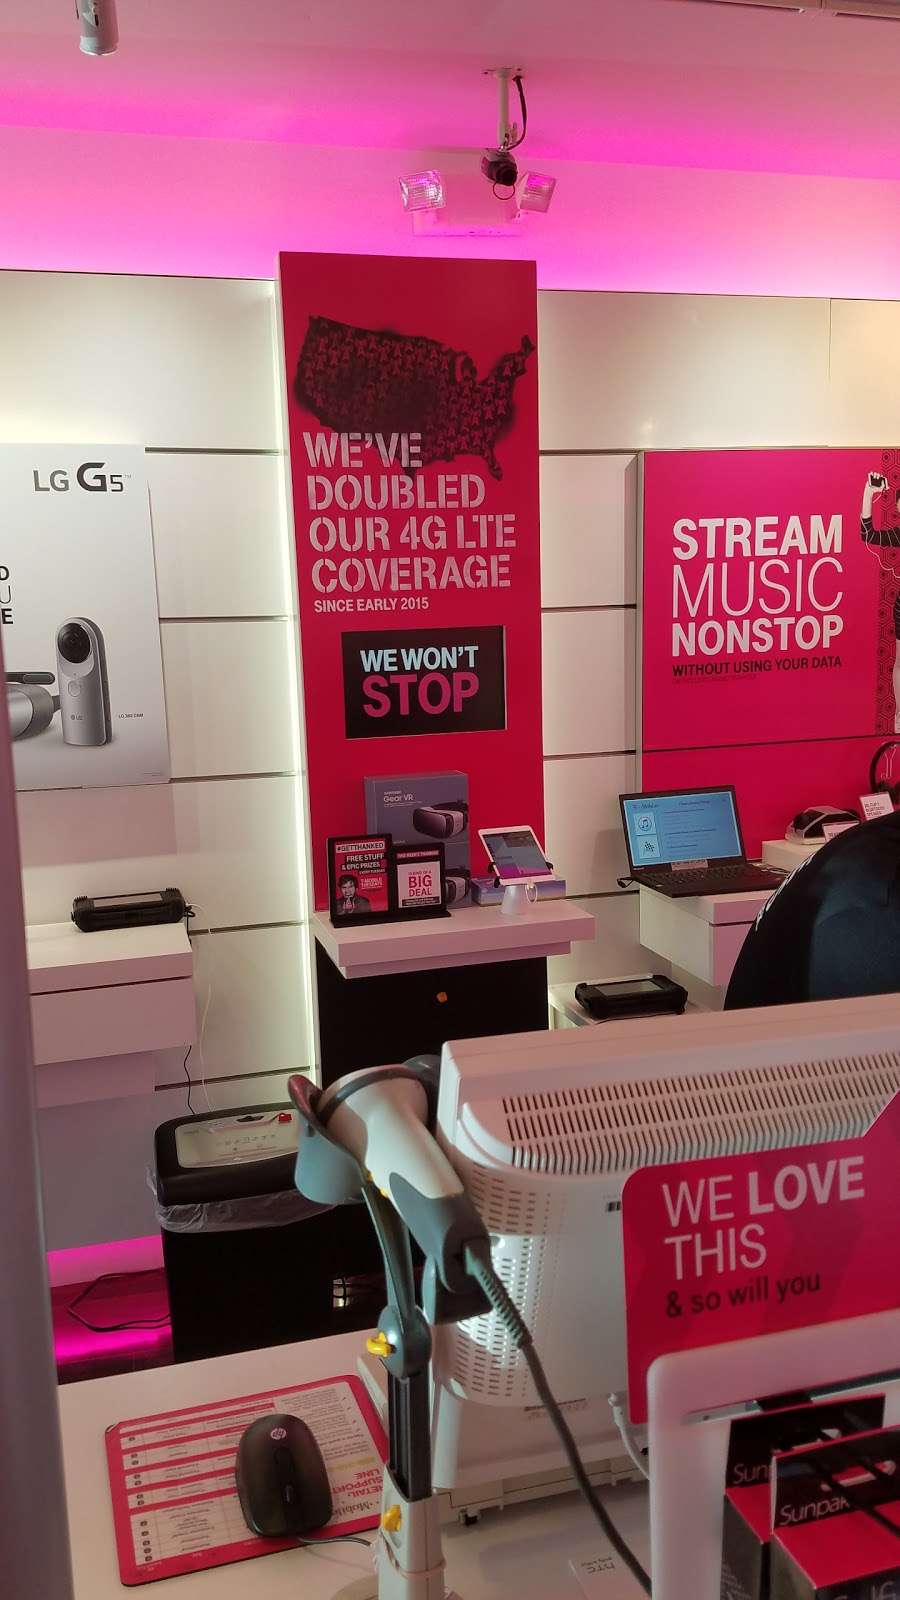 T-Mobile | 8220 E 96th St, Fishers, IN 46038 | Phone: (317) 915-5500